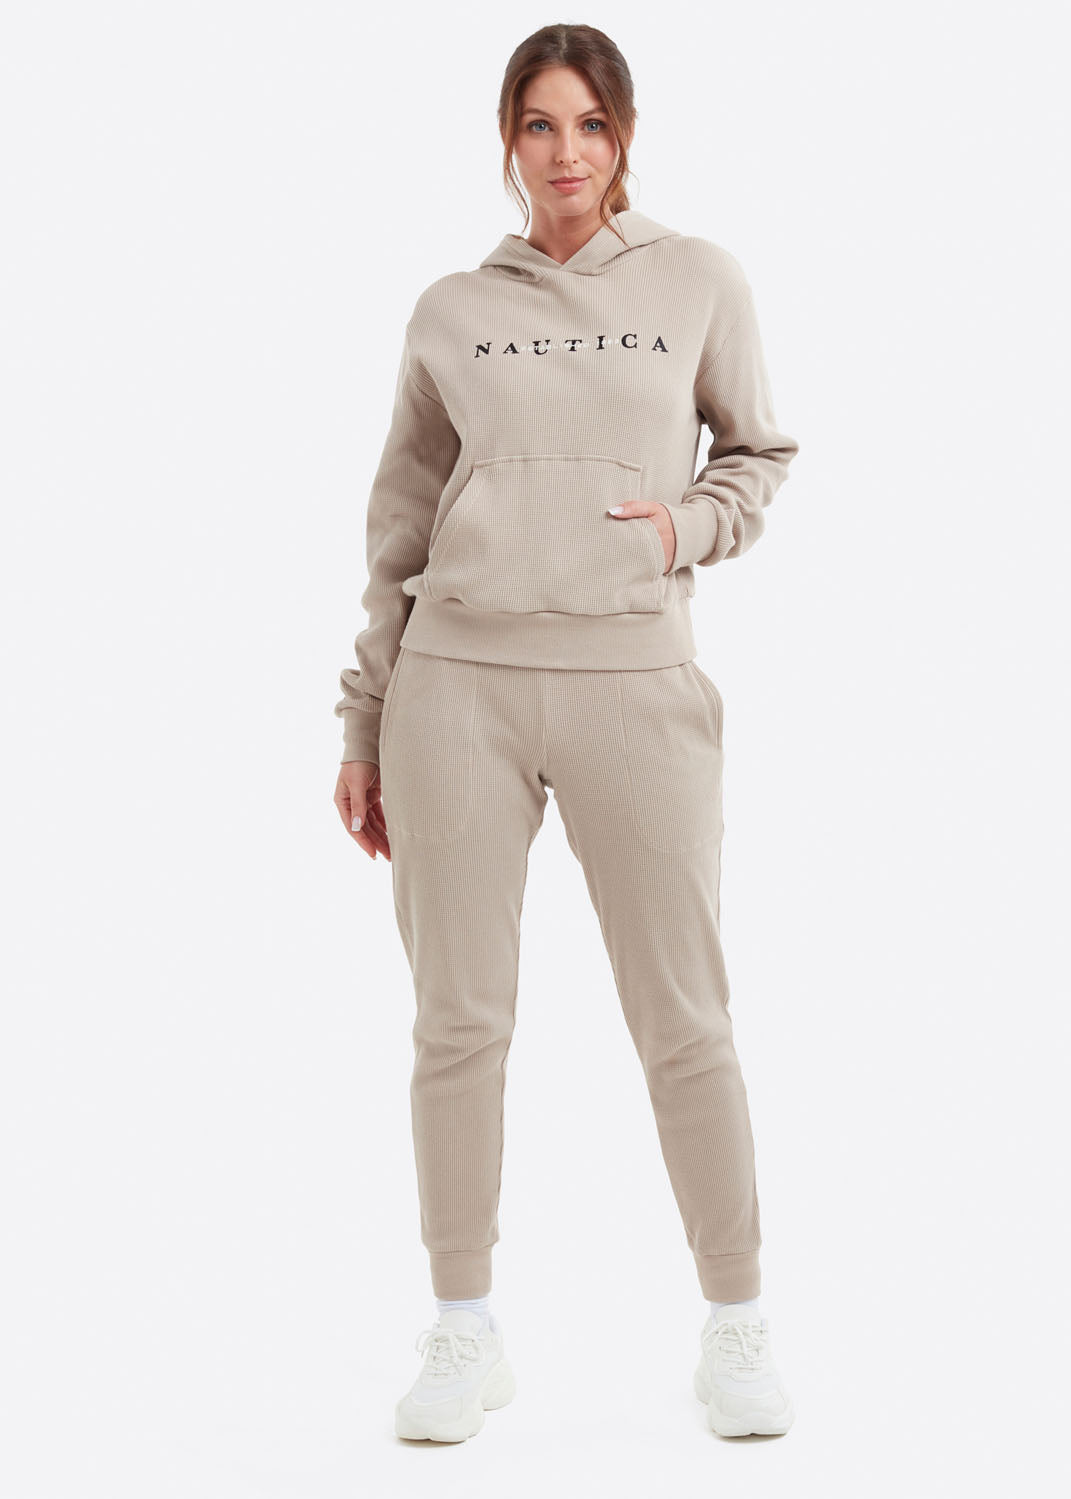 The Luna Cropped Hoody